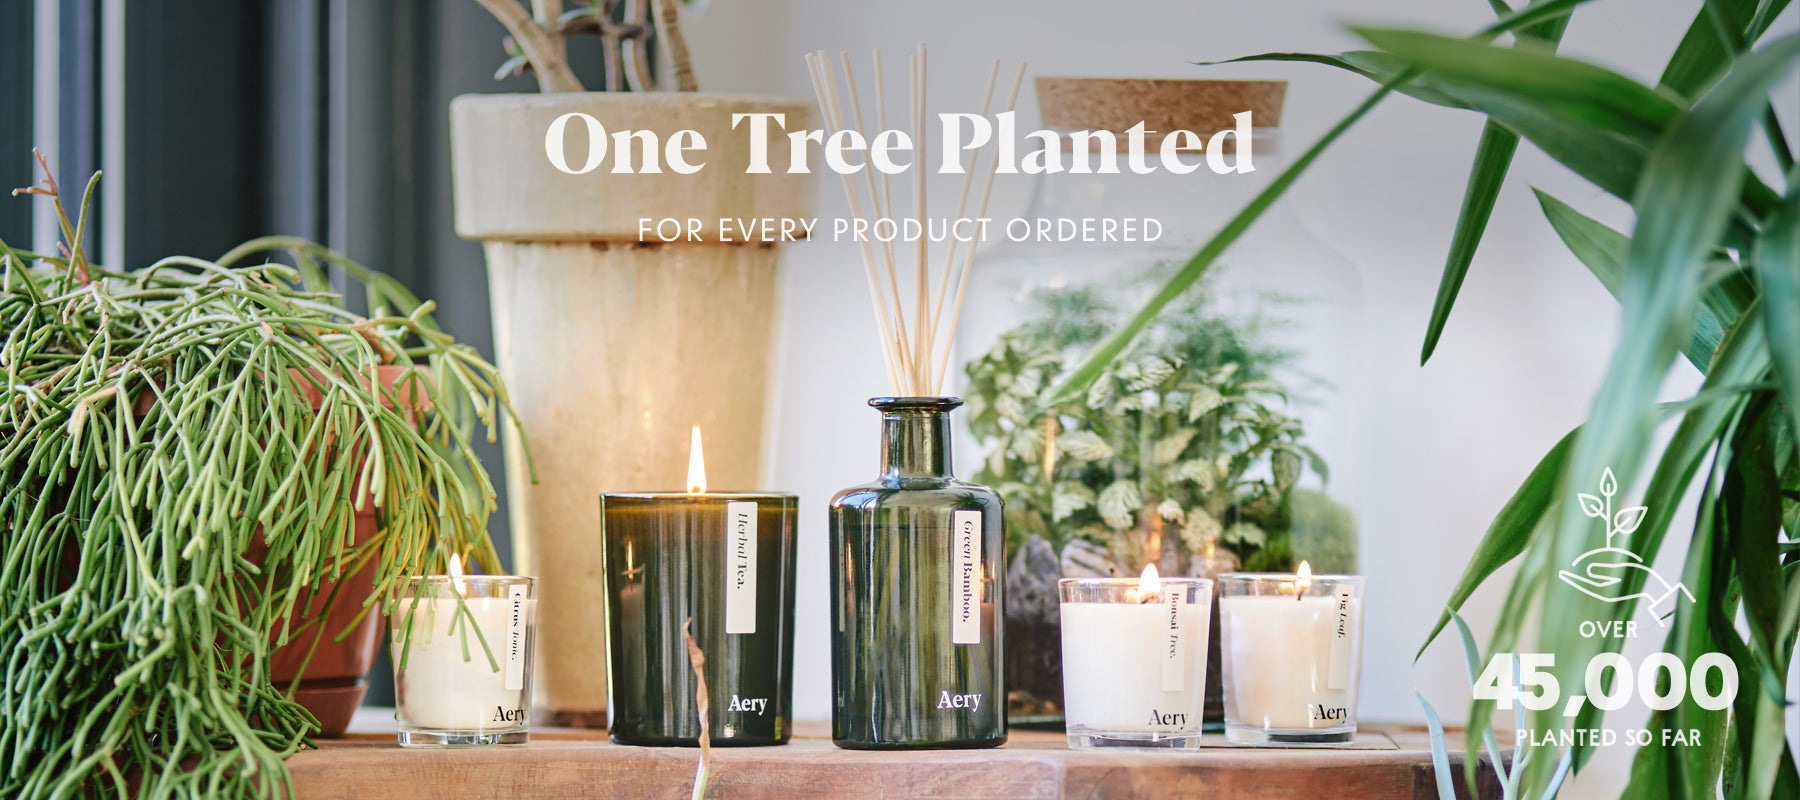 botanical house plants surrounding aery living candles and diffusers with graphics illustrating 45,000 trees planted